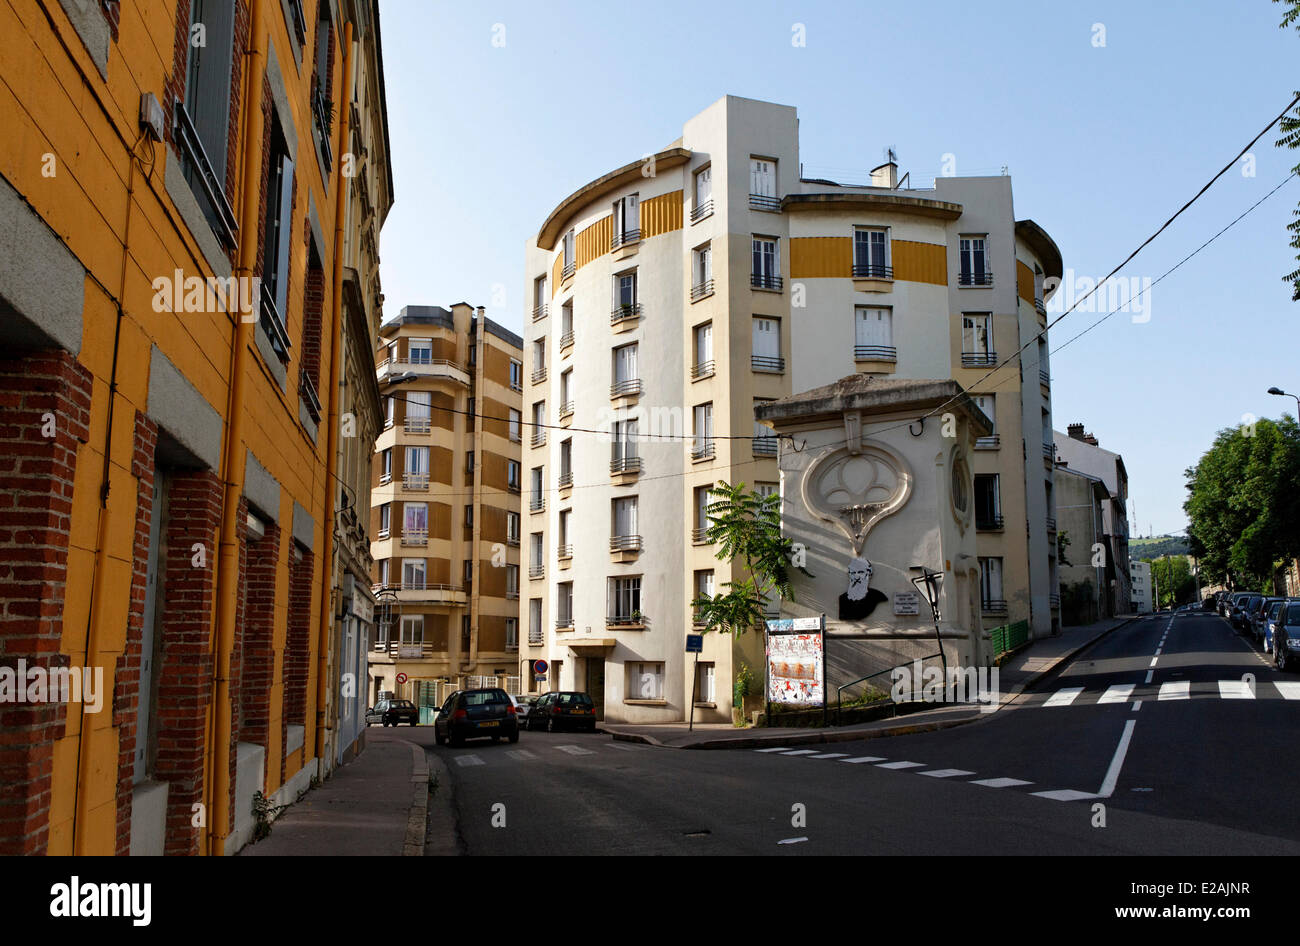 France, Loire, Saint Etienne, Chalets de Bizillon or building without stairs, are two identical buildings housing built by Stock Photo